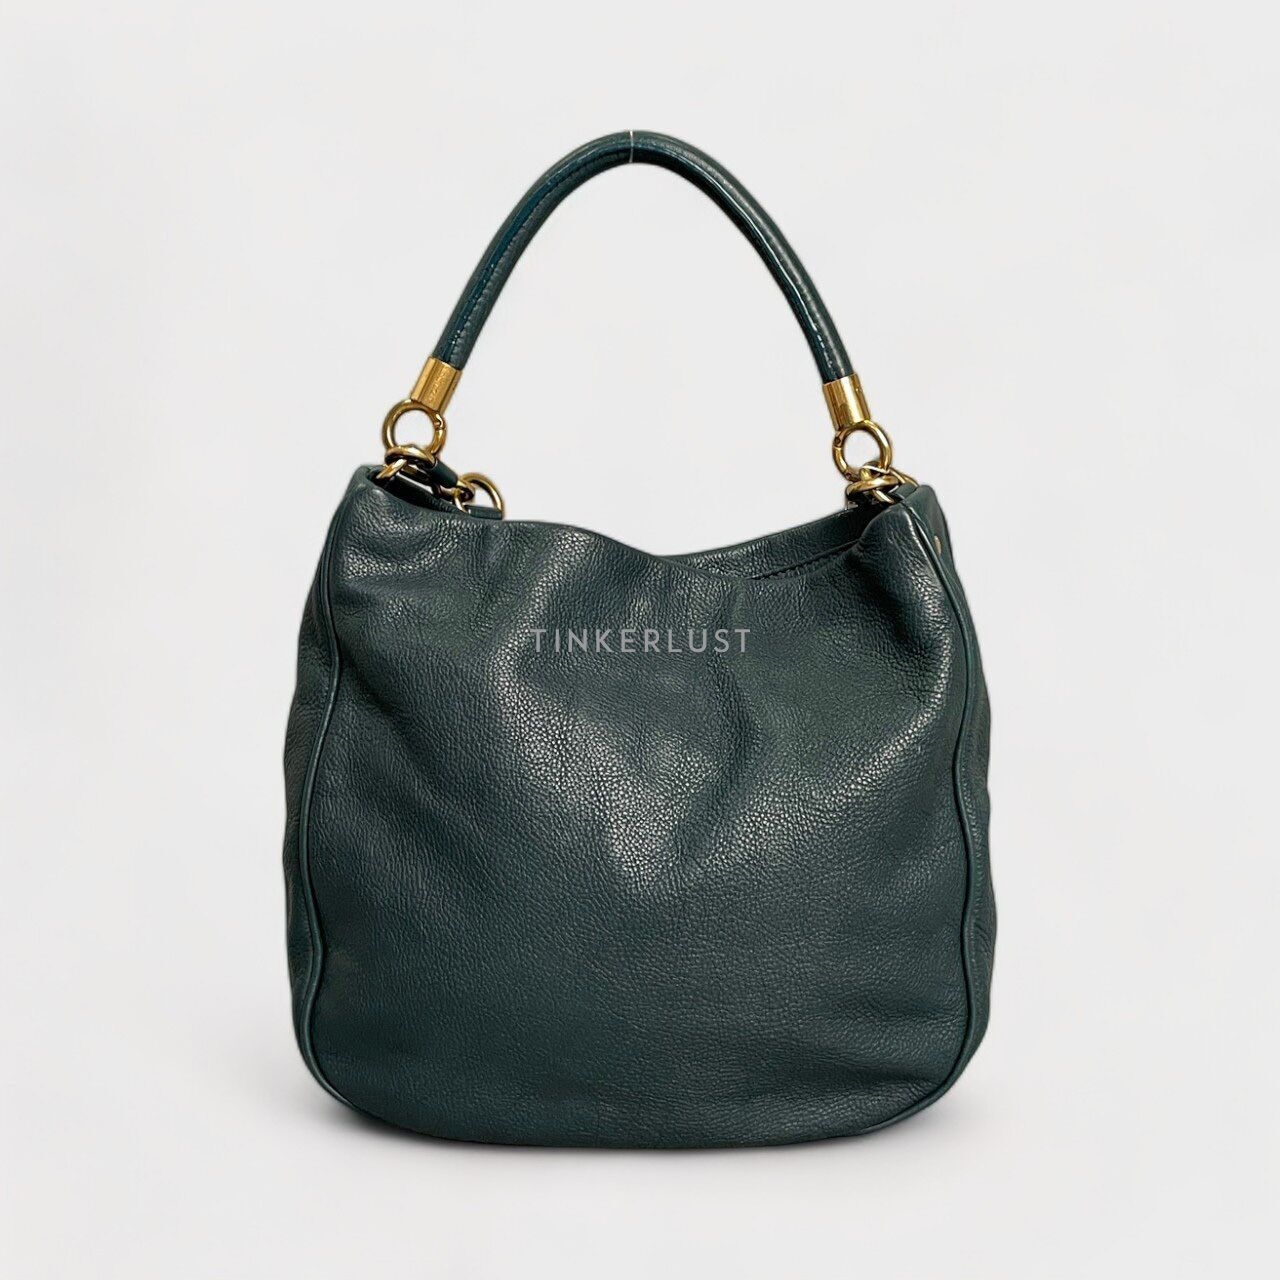 Marc by Marc Jacobs Too Hot to Handle Emerald Leather Hobo Bag